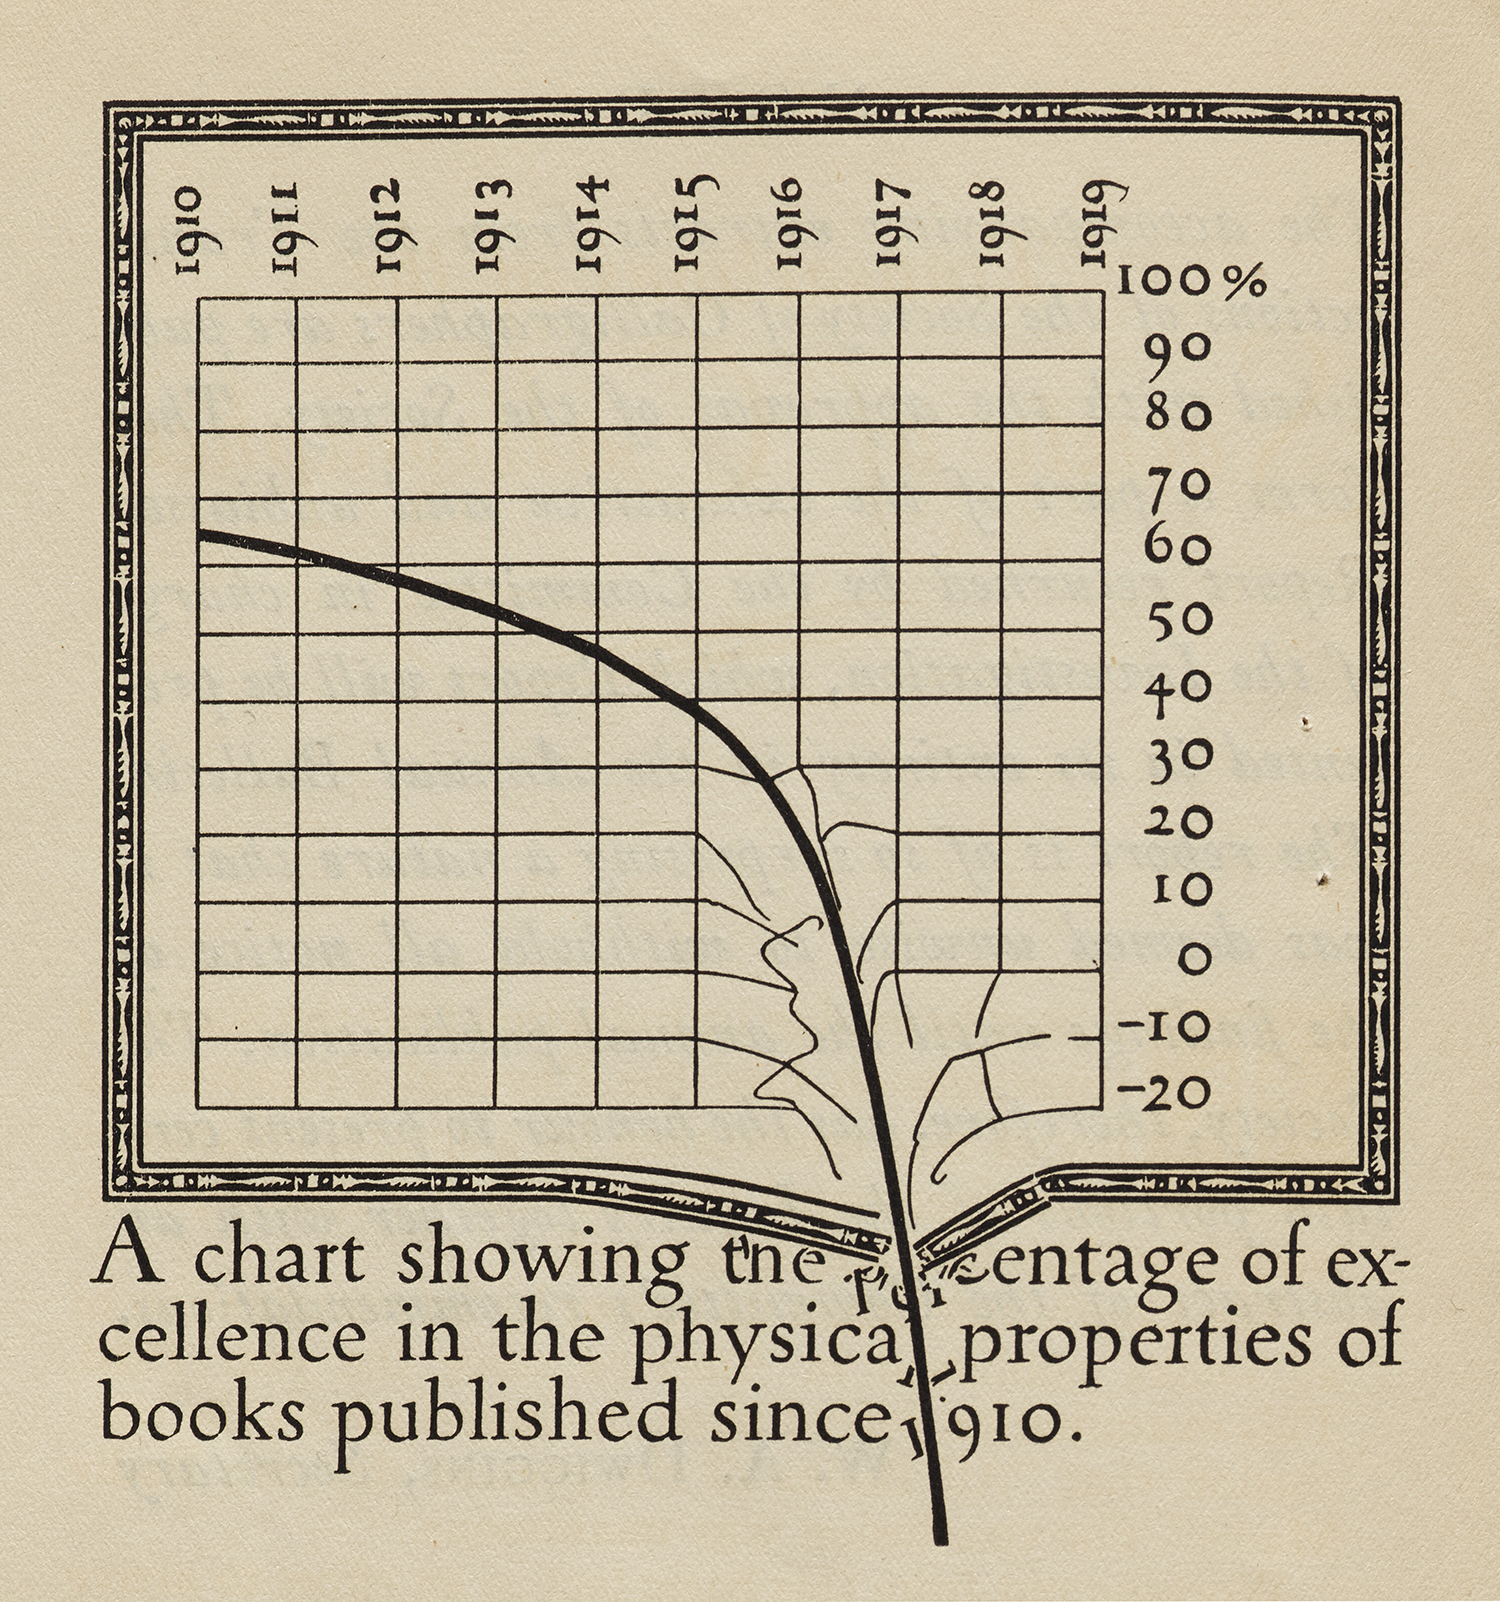  Detail from “Extracts from an Investigation into the Physical Properties of Books, as They are at Present Published, Undertaken by the Society of Calligraphers.” (Boston: W. A. Dwiggins and L. B Siegfried, 1919). Collection of Letterform Archive. 